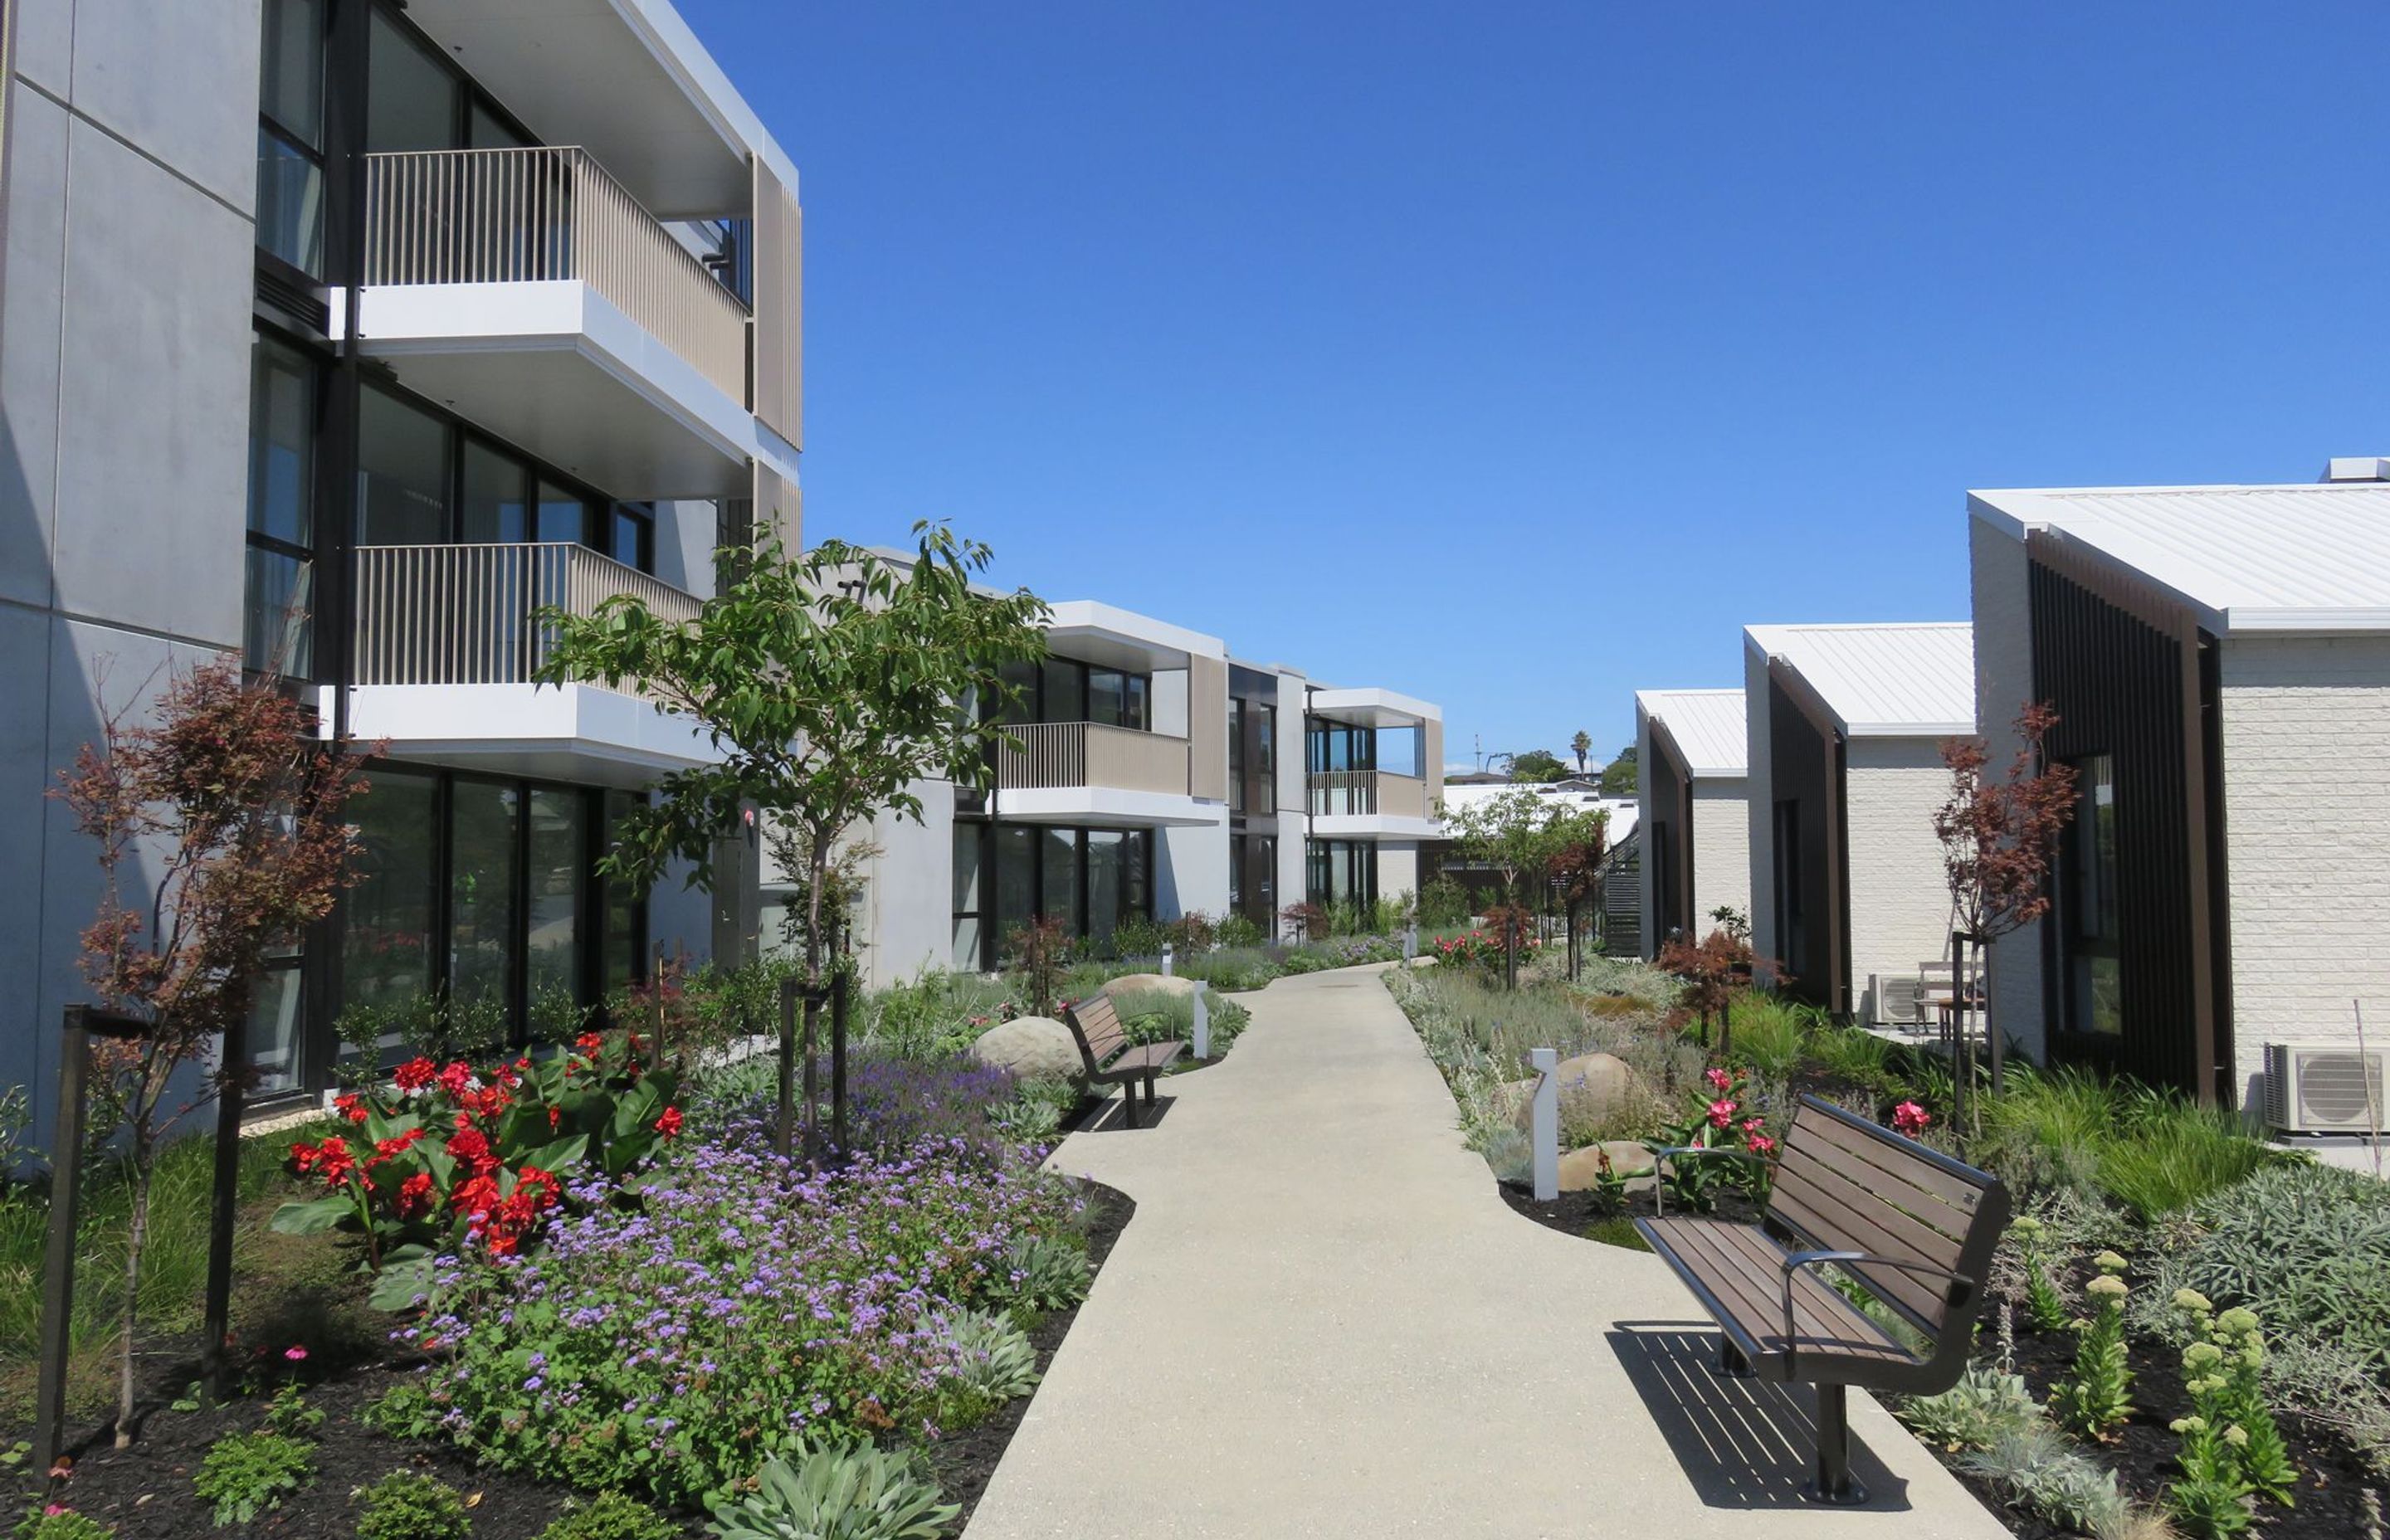 For its latest lifestyle village, Metlifecare wanted a more community based model with outdoor spaces being more communal and where the built environment was better connected to the natural environment.